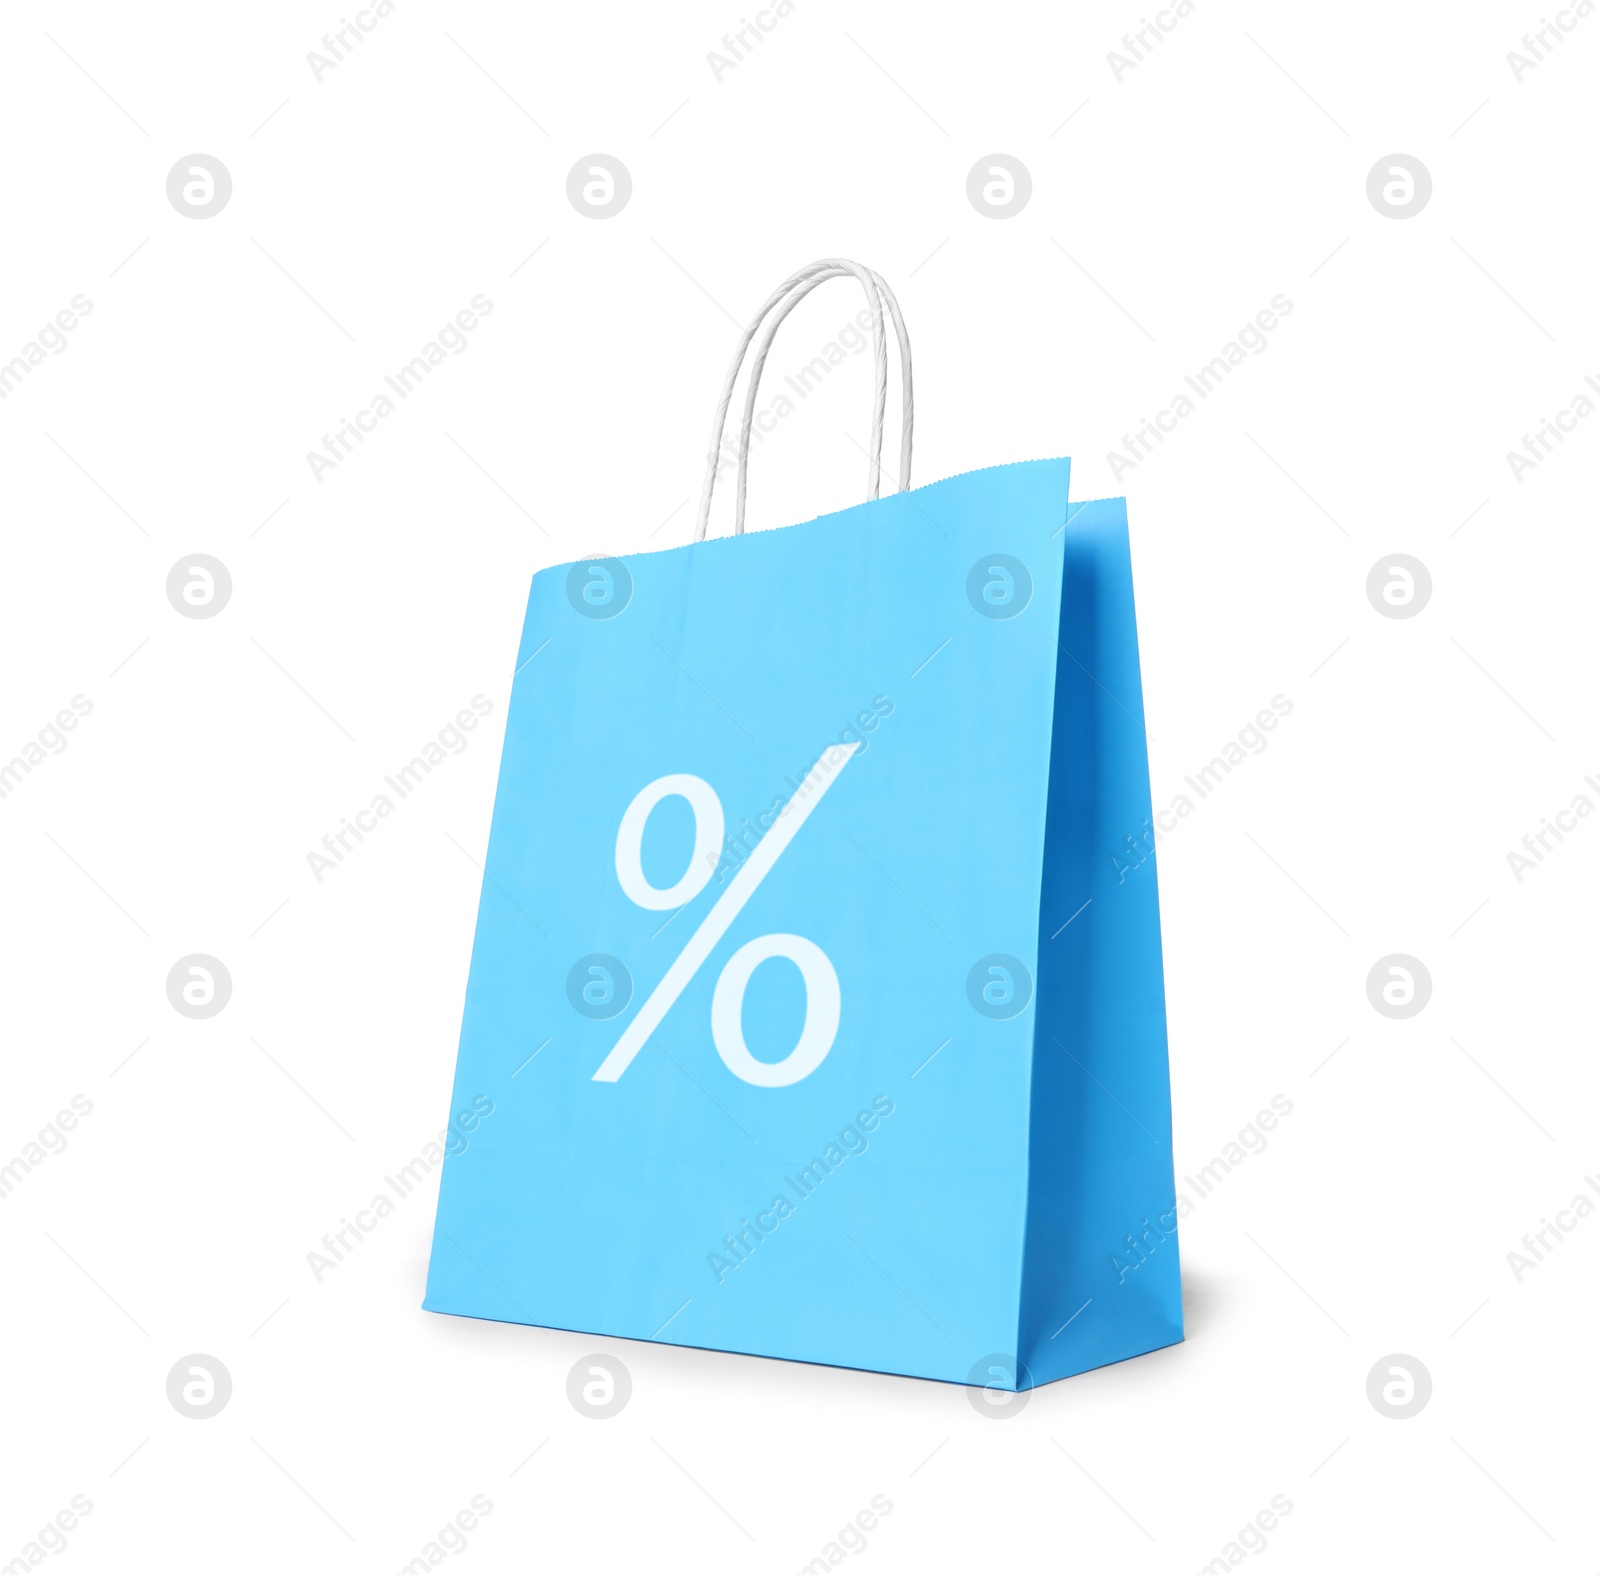 Image of Light blue paper bag with percent sign isolated on white